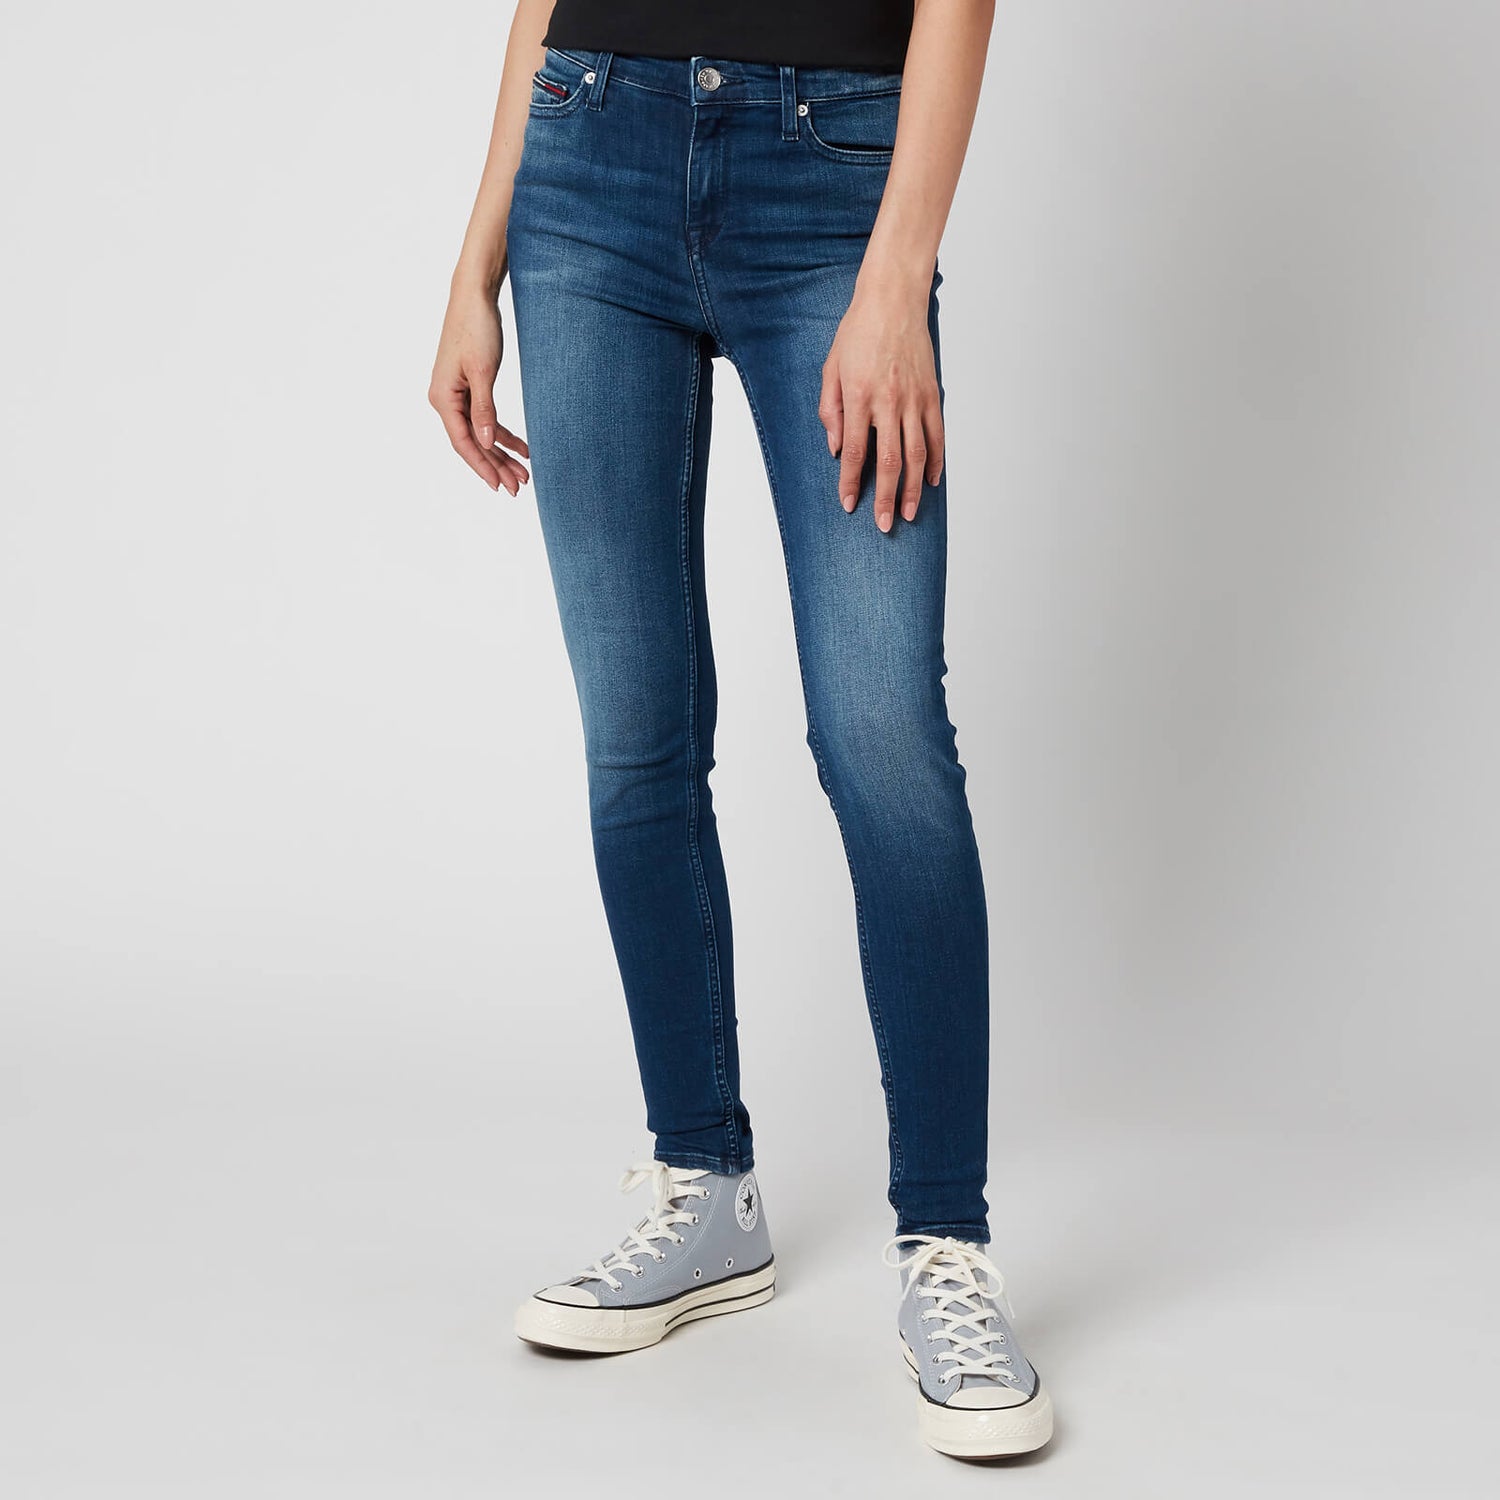 Tommy Jeans Women's Nora Mid-Rise Skinny Jeans - Niceville Mid Blue